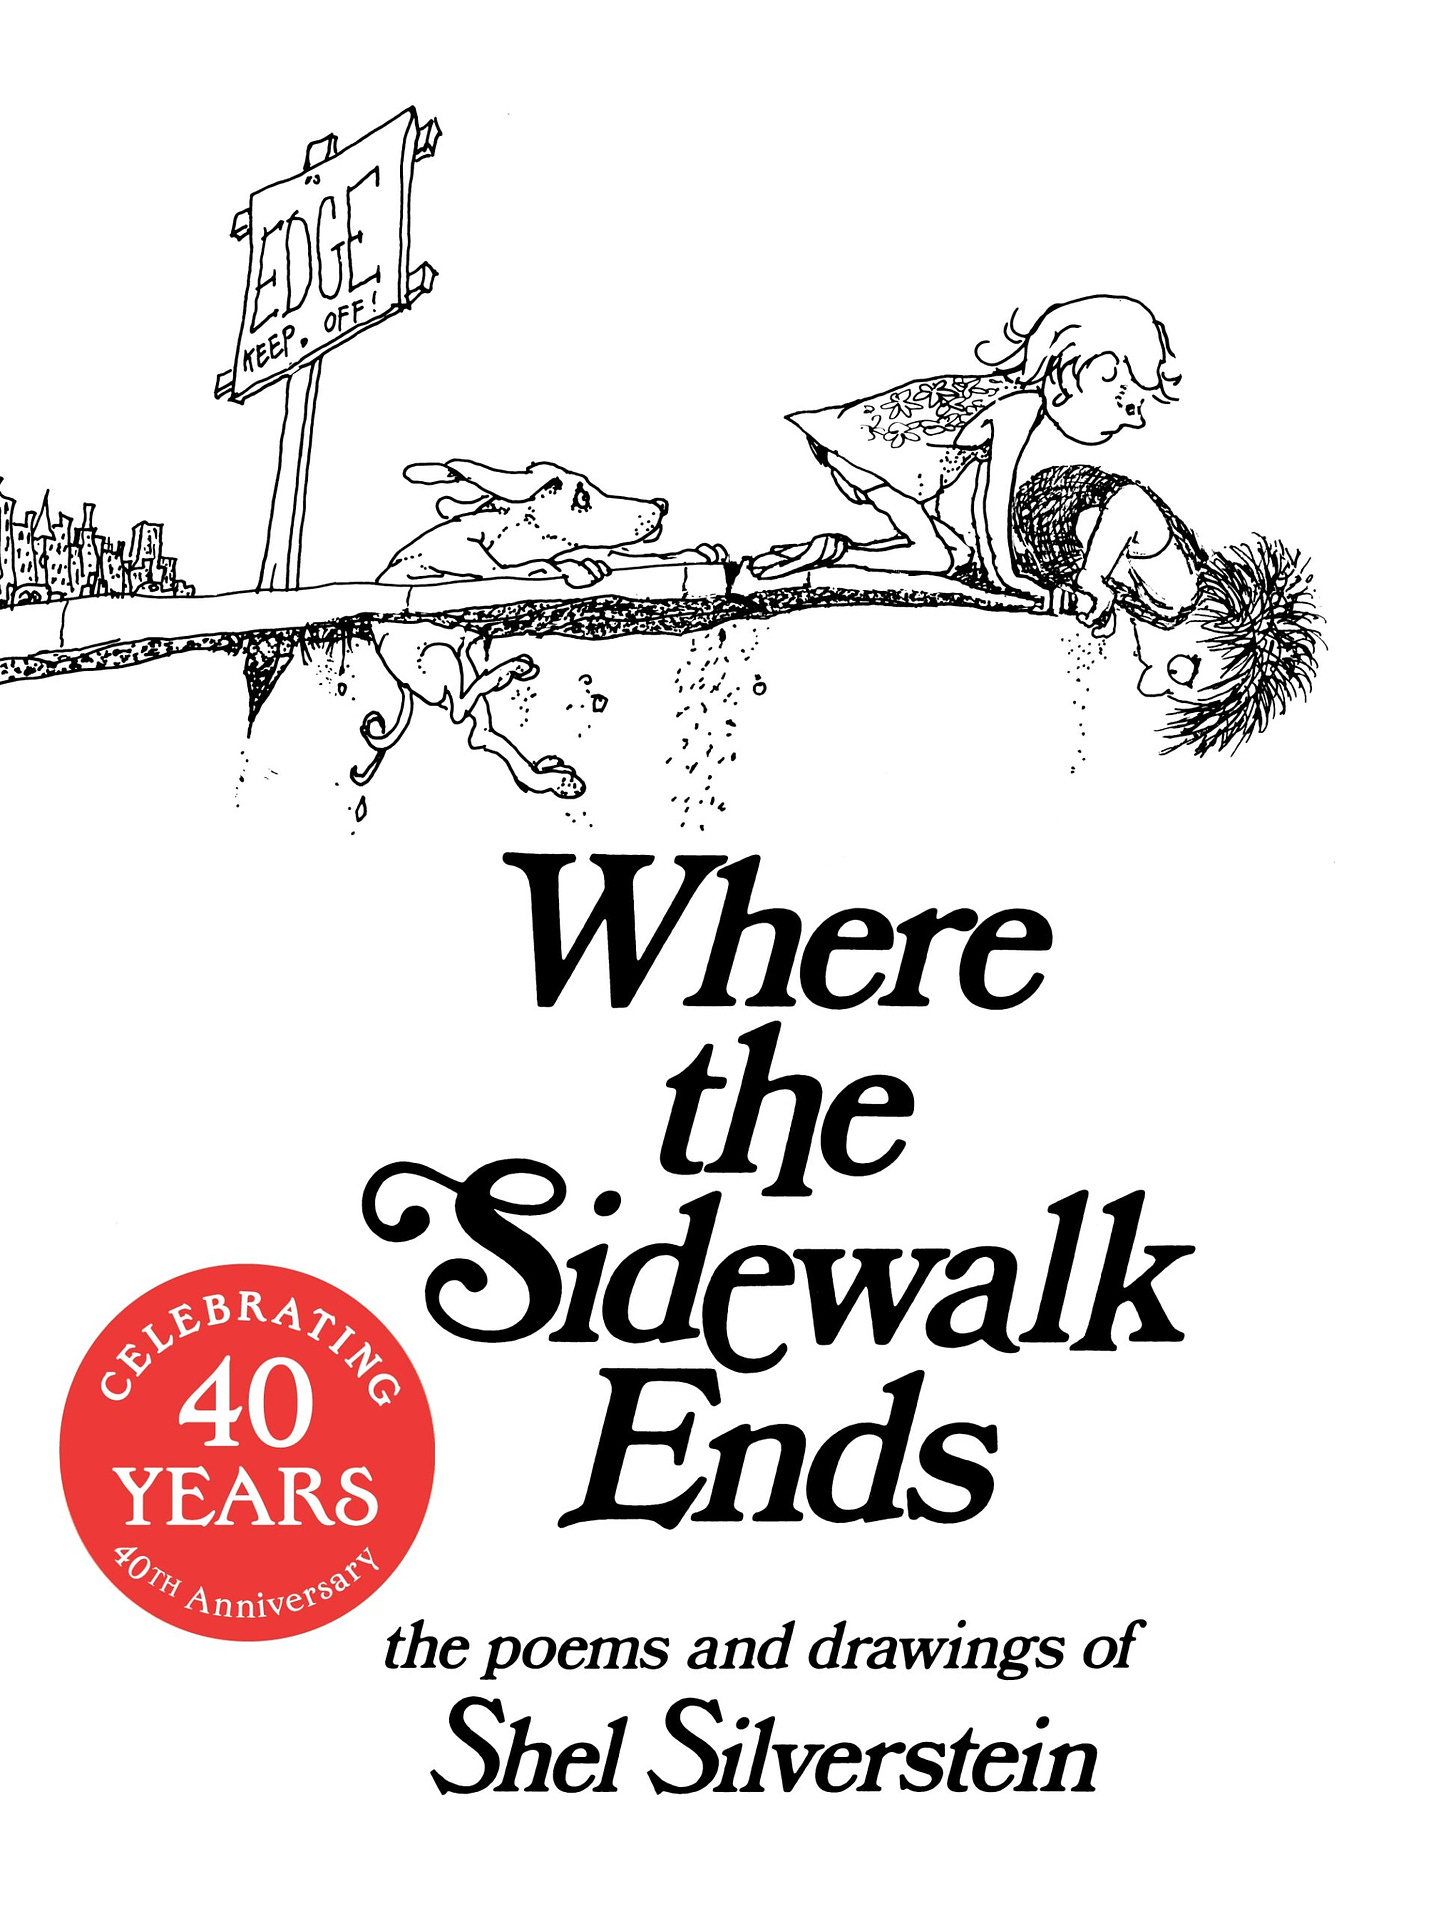 This is a picture of the cover of Where the Sidewalk Ends.